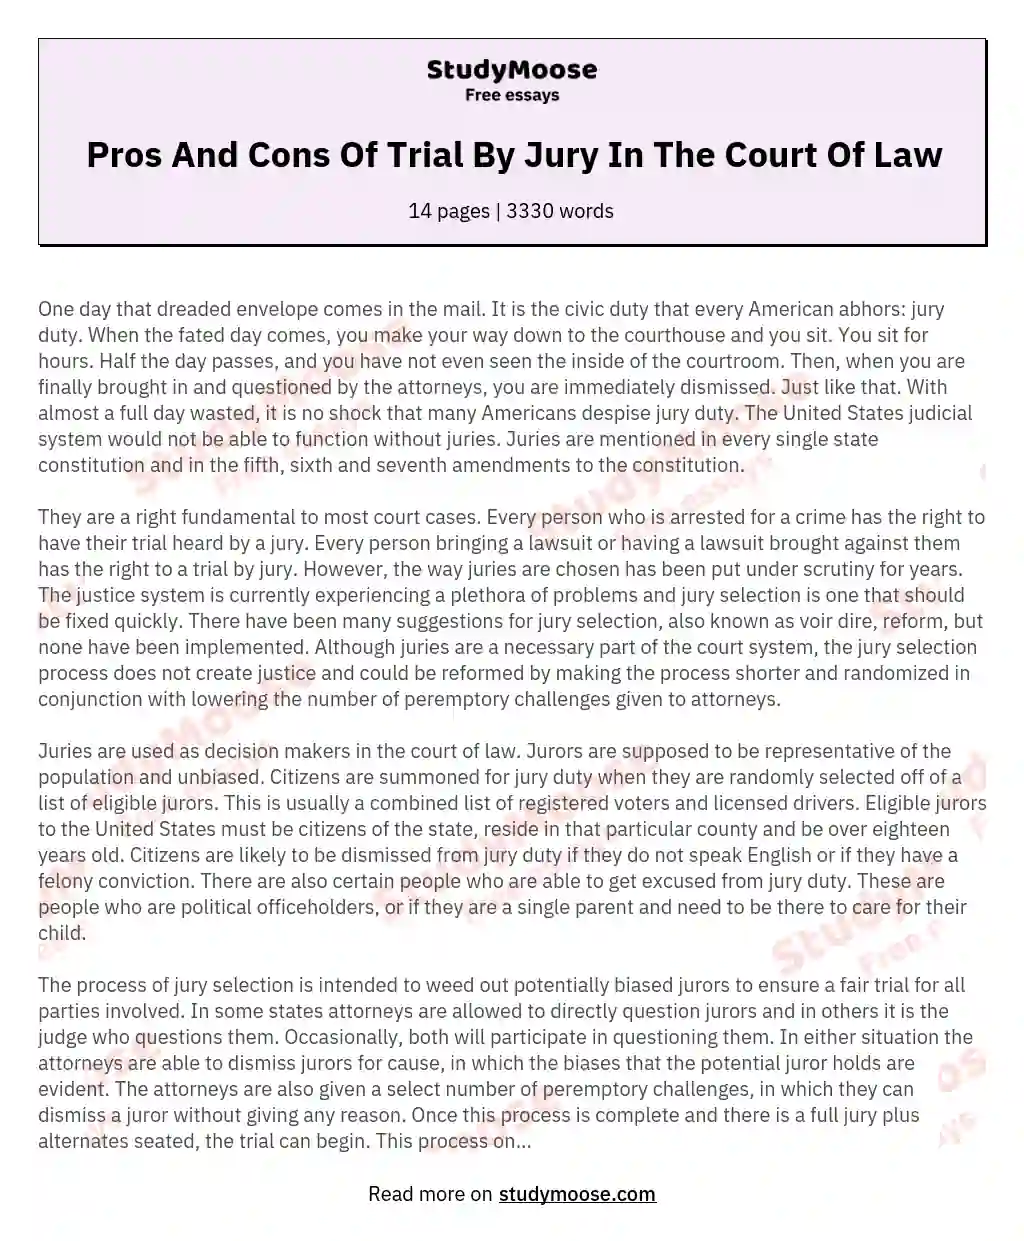 Pros And Cons Of Trial By Jury In The Court Of Law essay